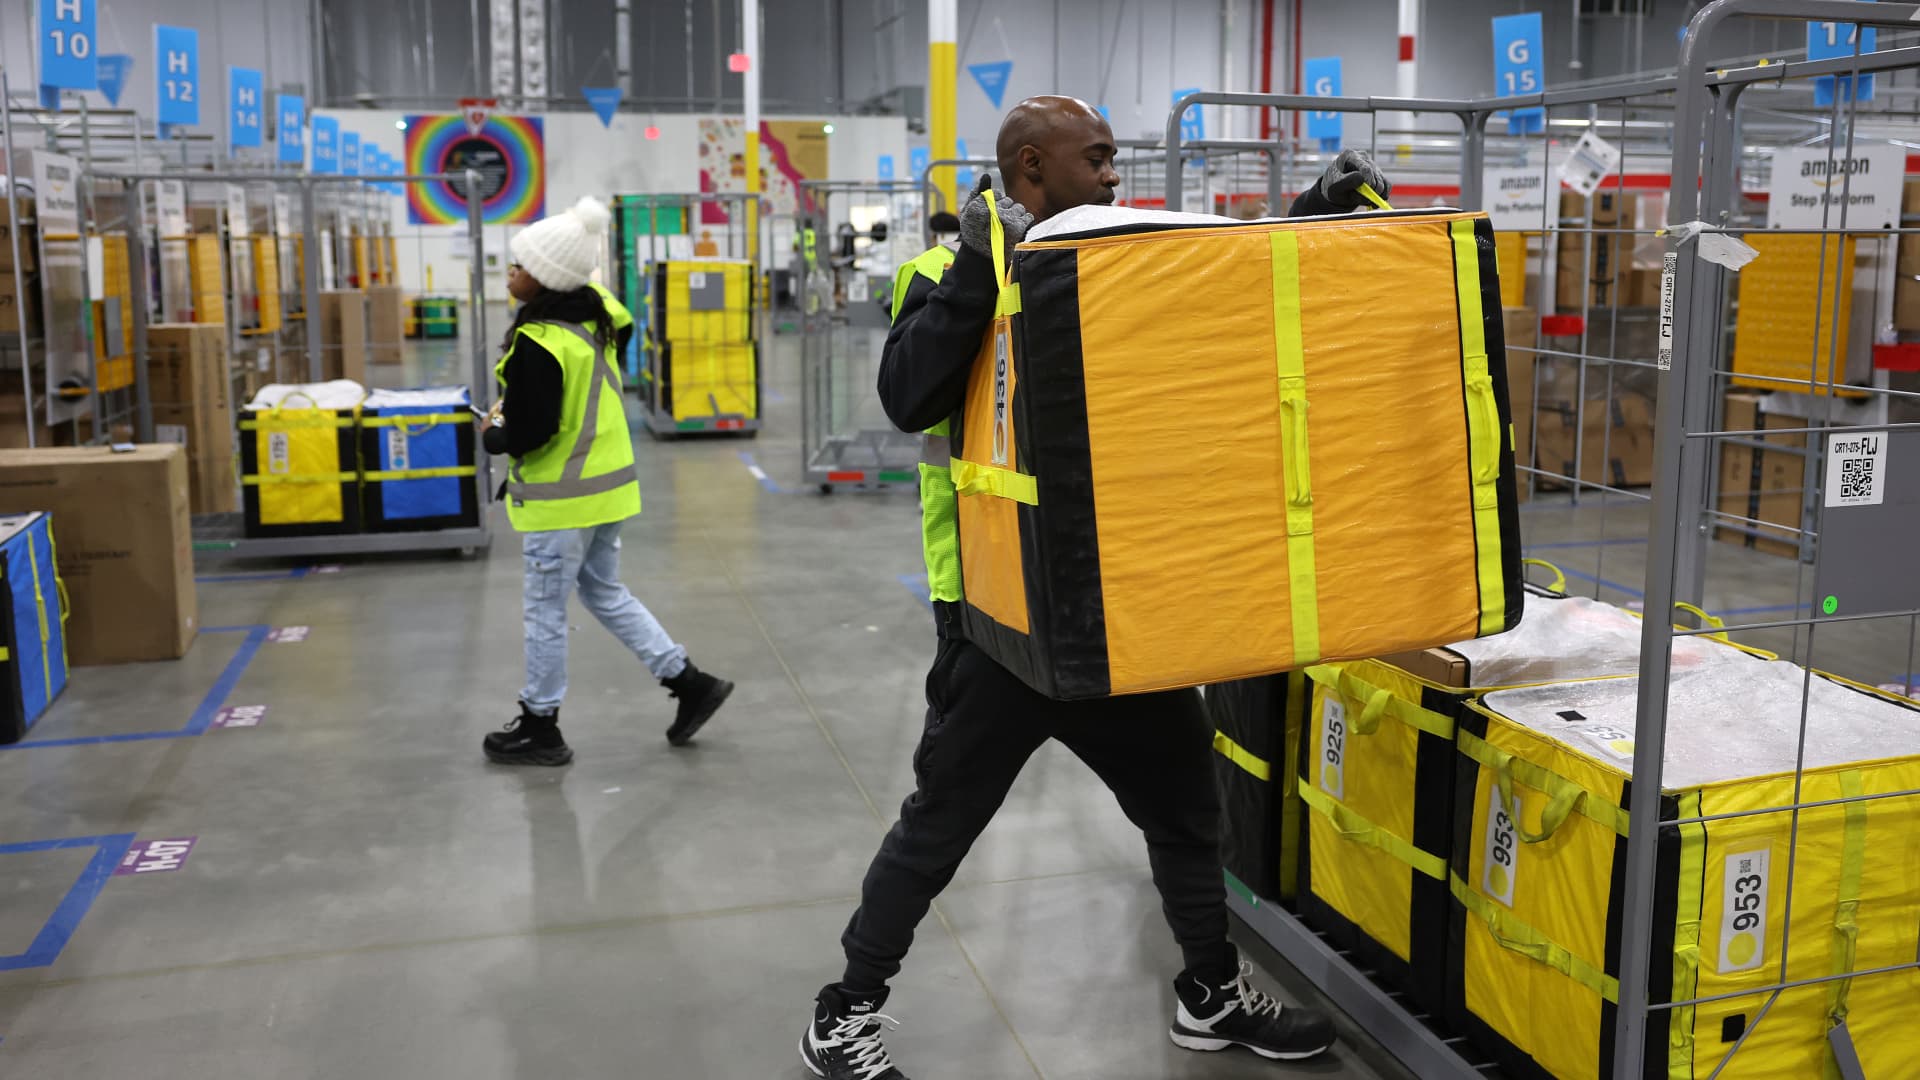 An Amazon worker moves a package onto a cart at an Amazon delivery station on November 28, 2022 in Alpharetta, Georgia.